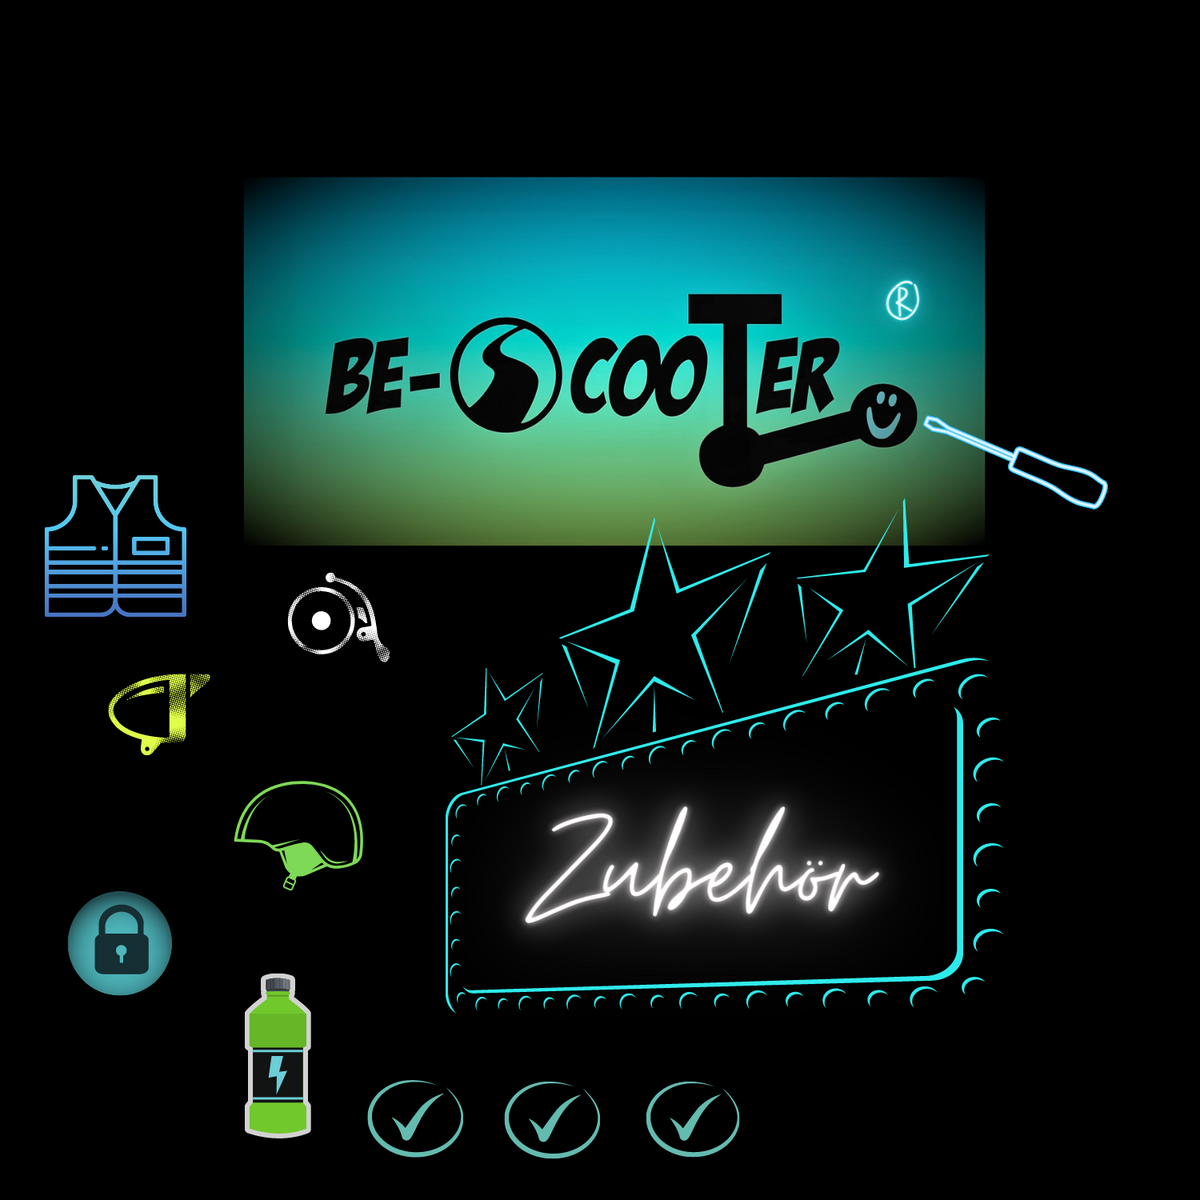 E-SCooTER ZUBEHÖR – BE-SCooTER® 